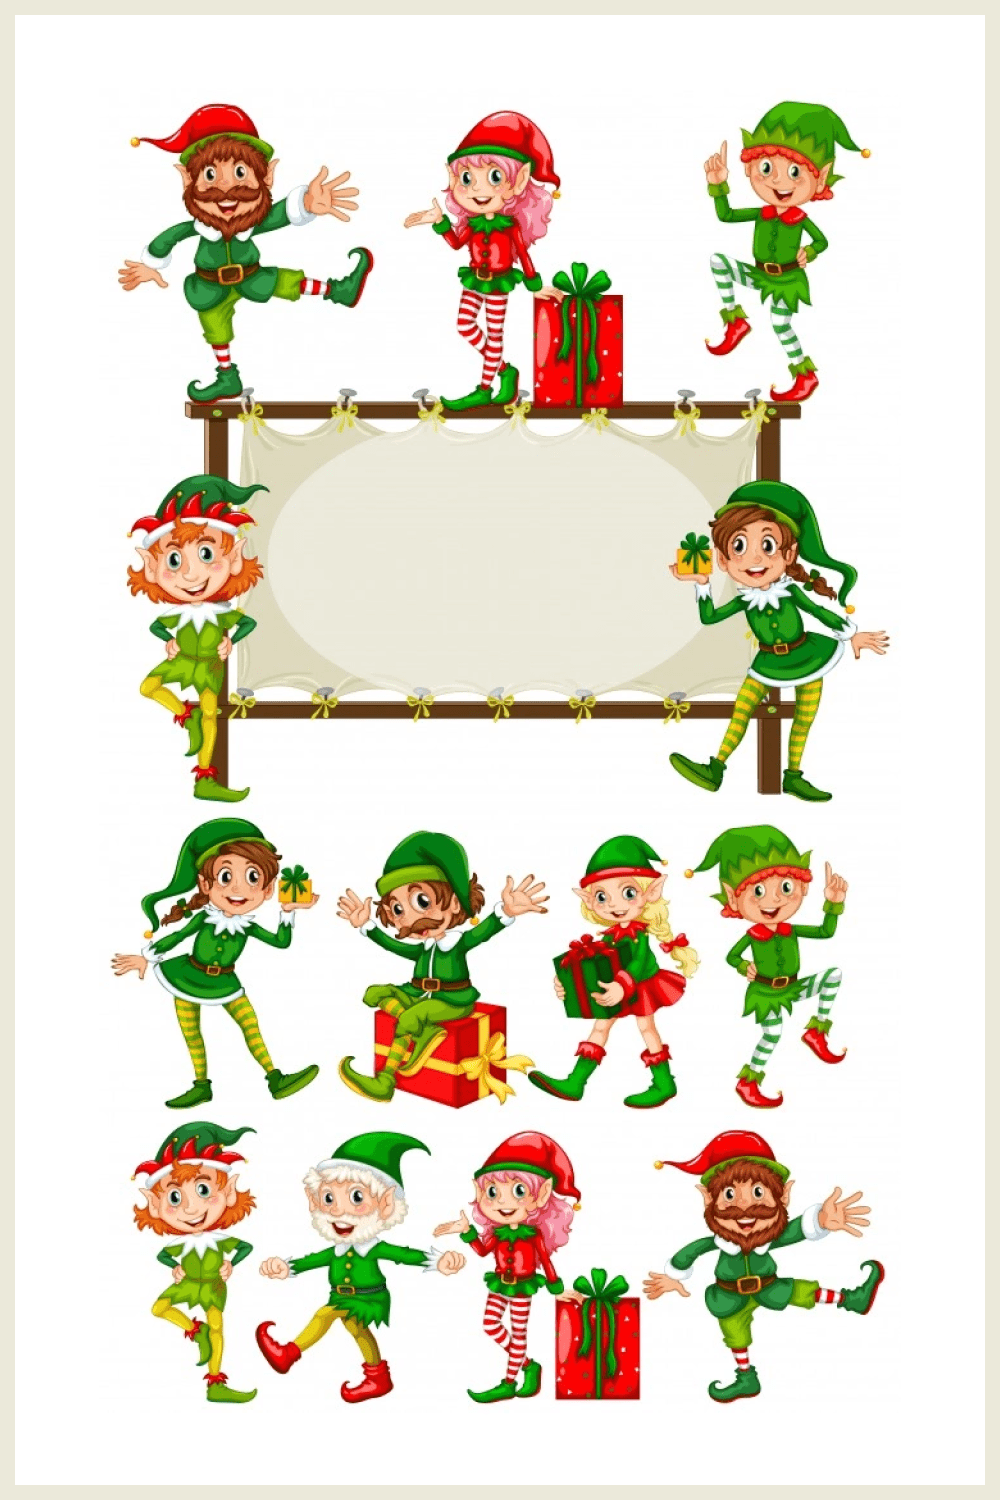 funny elves in Christmas costumes and gifts.